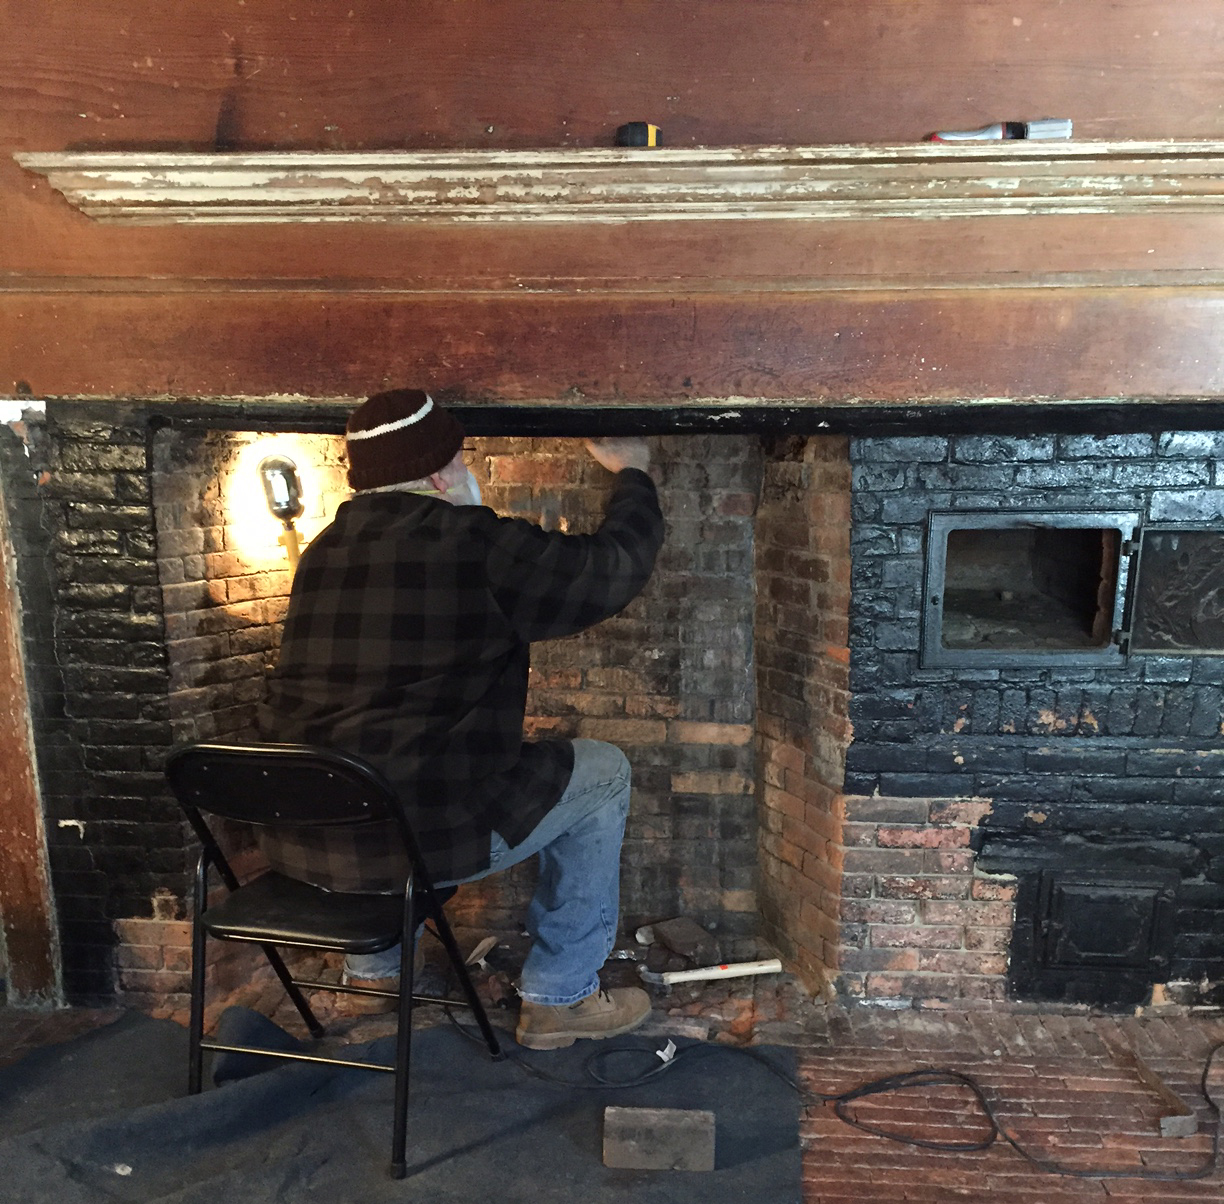 Restoring a keeping room fireplace brick by brick.